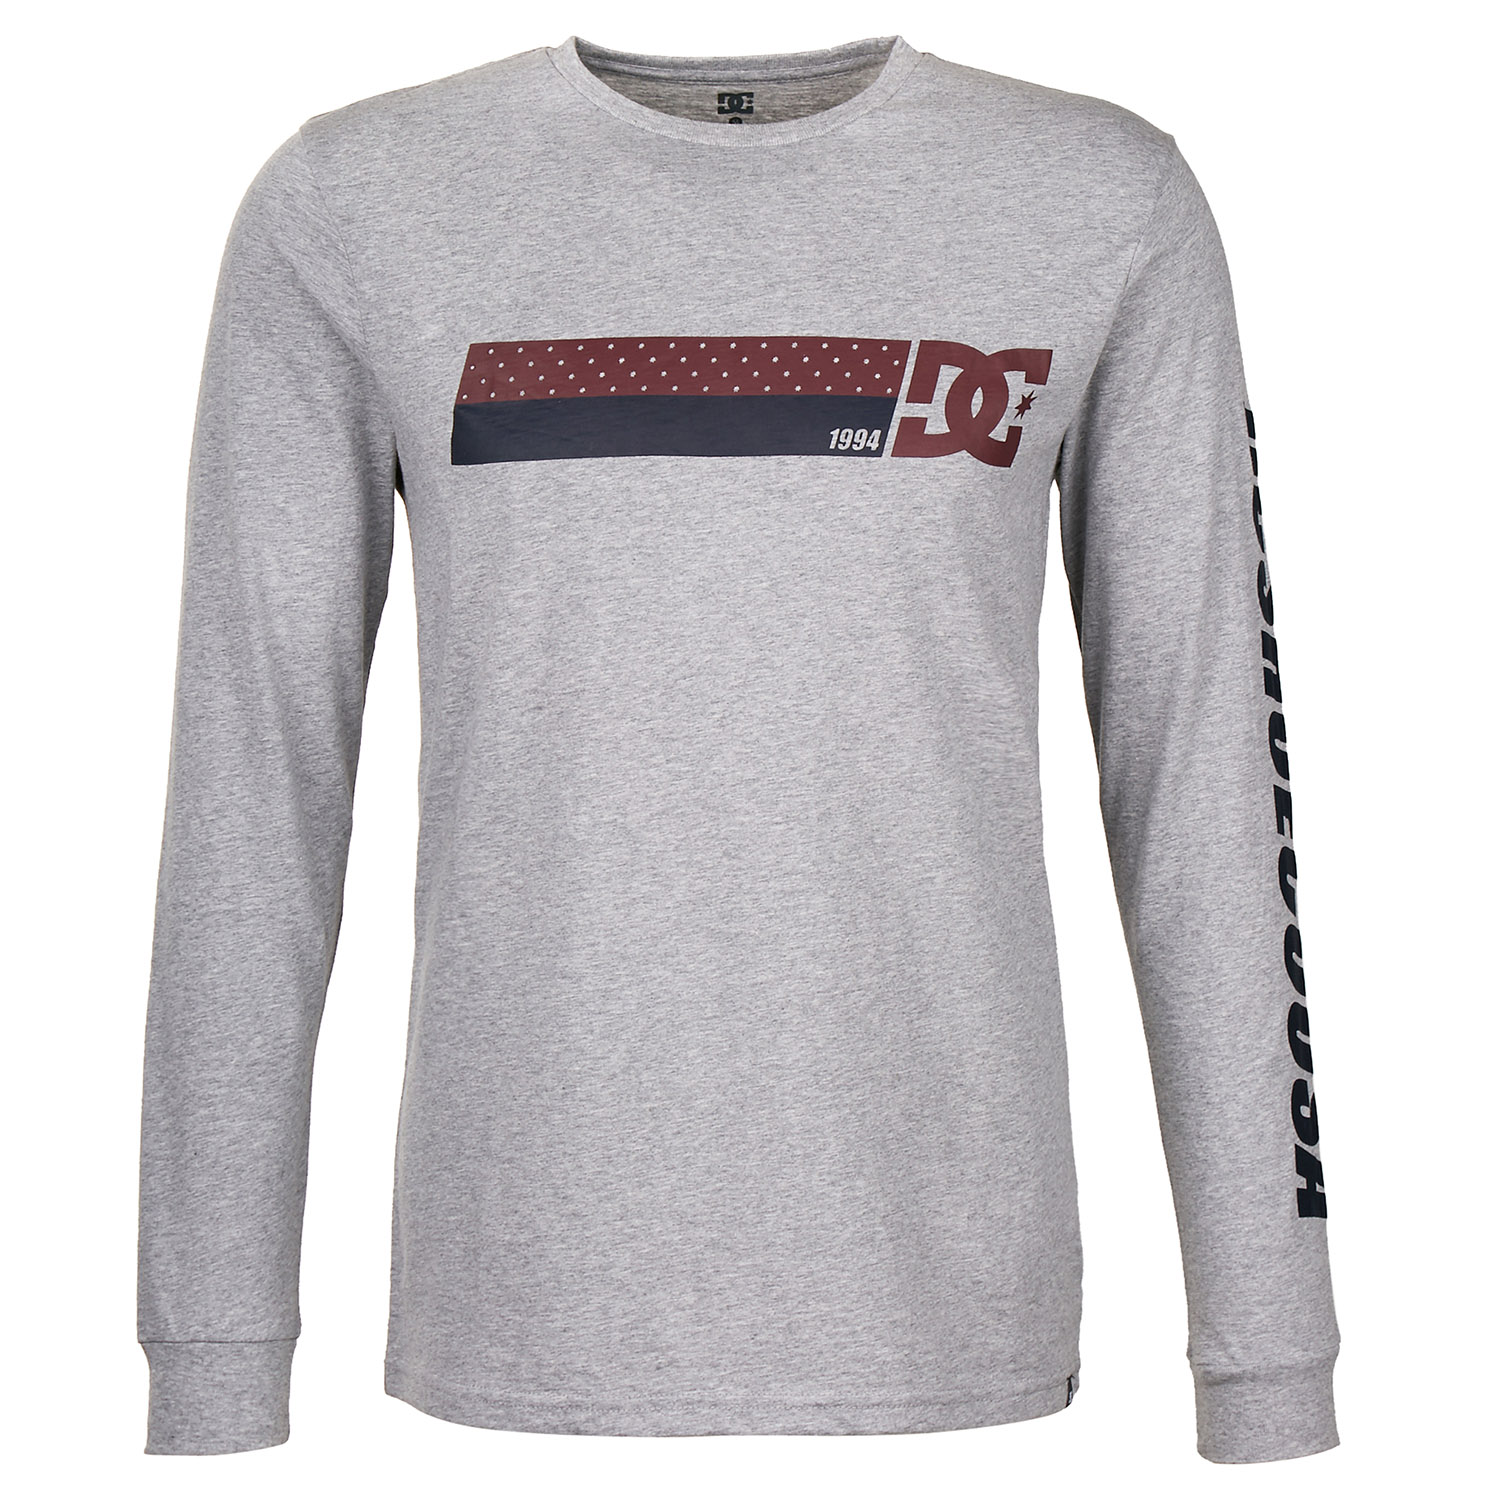 DC T-Shirt Manches Longues Disaster Grey Heather